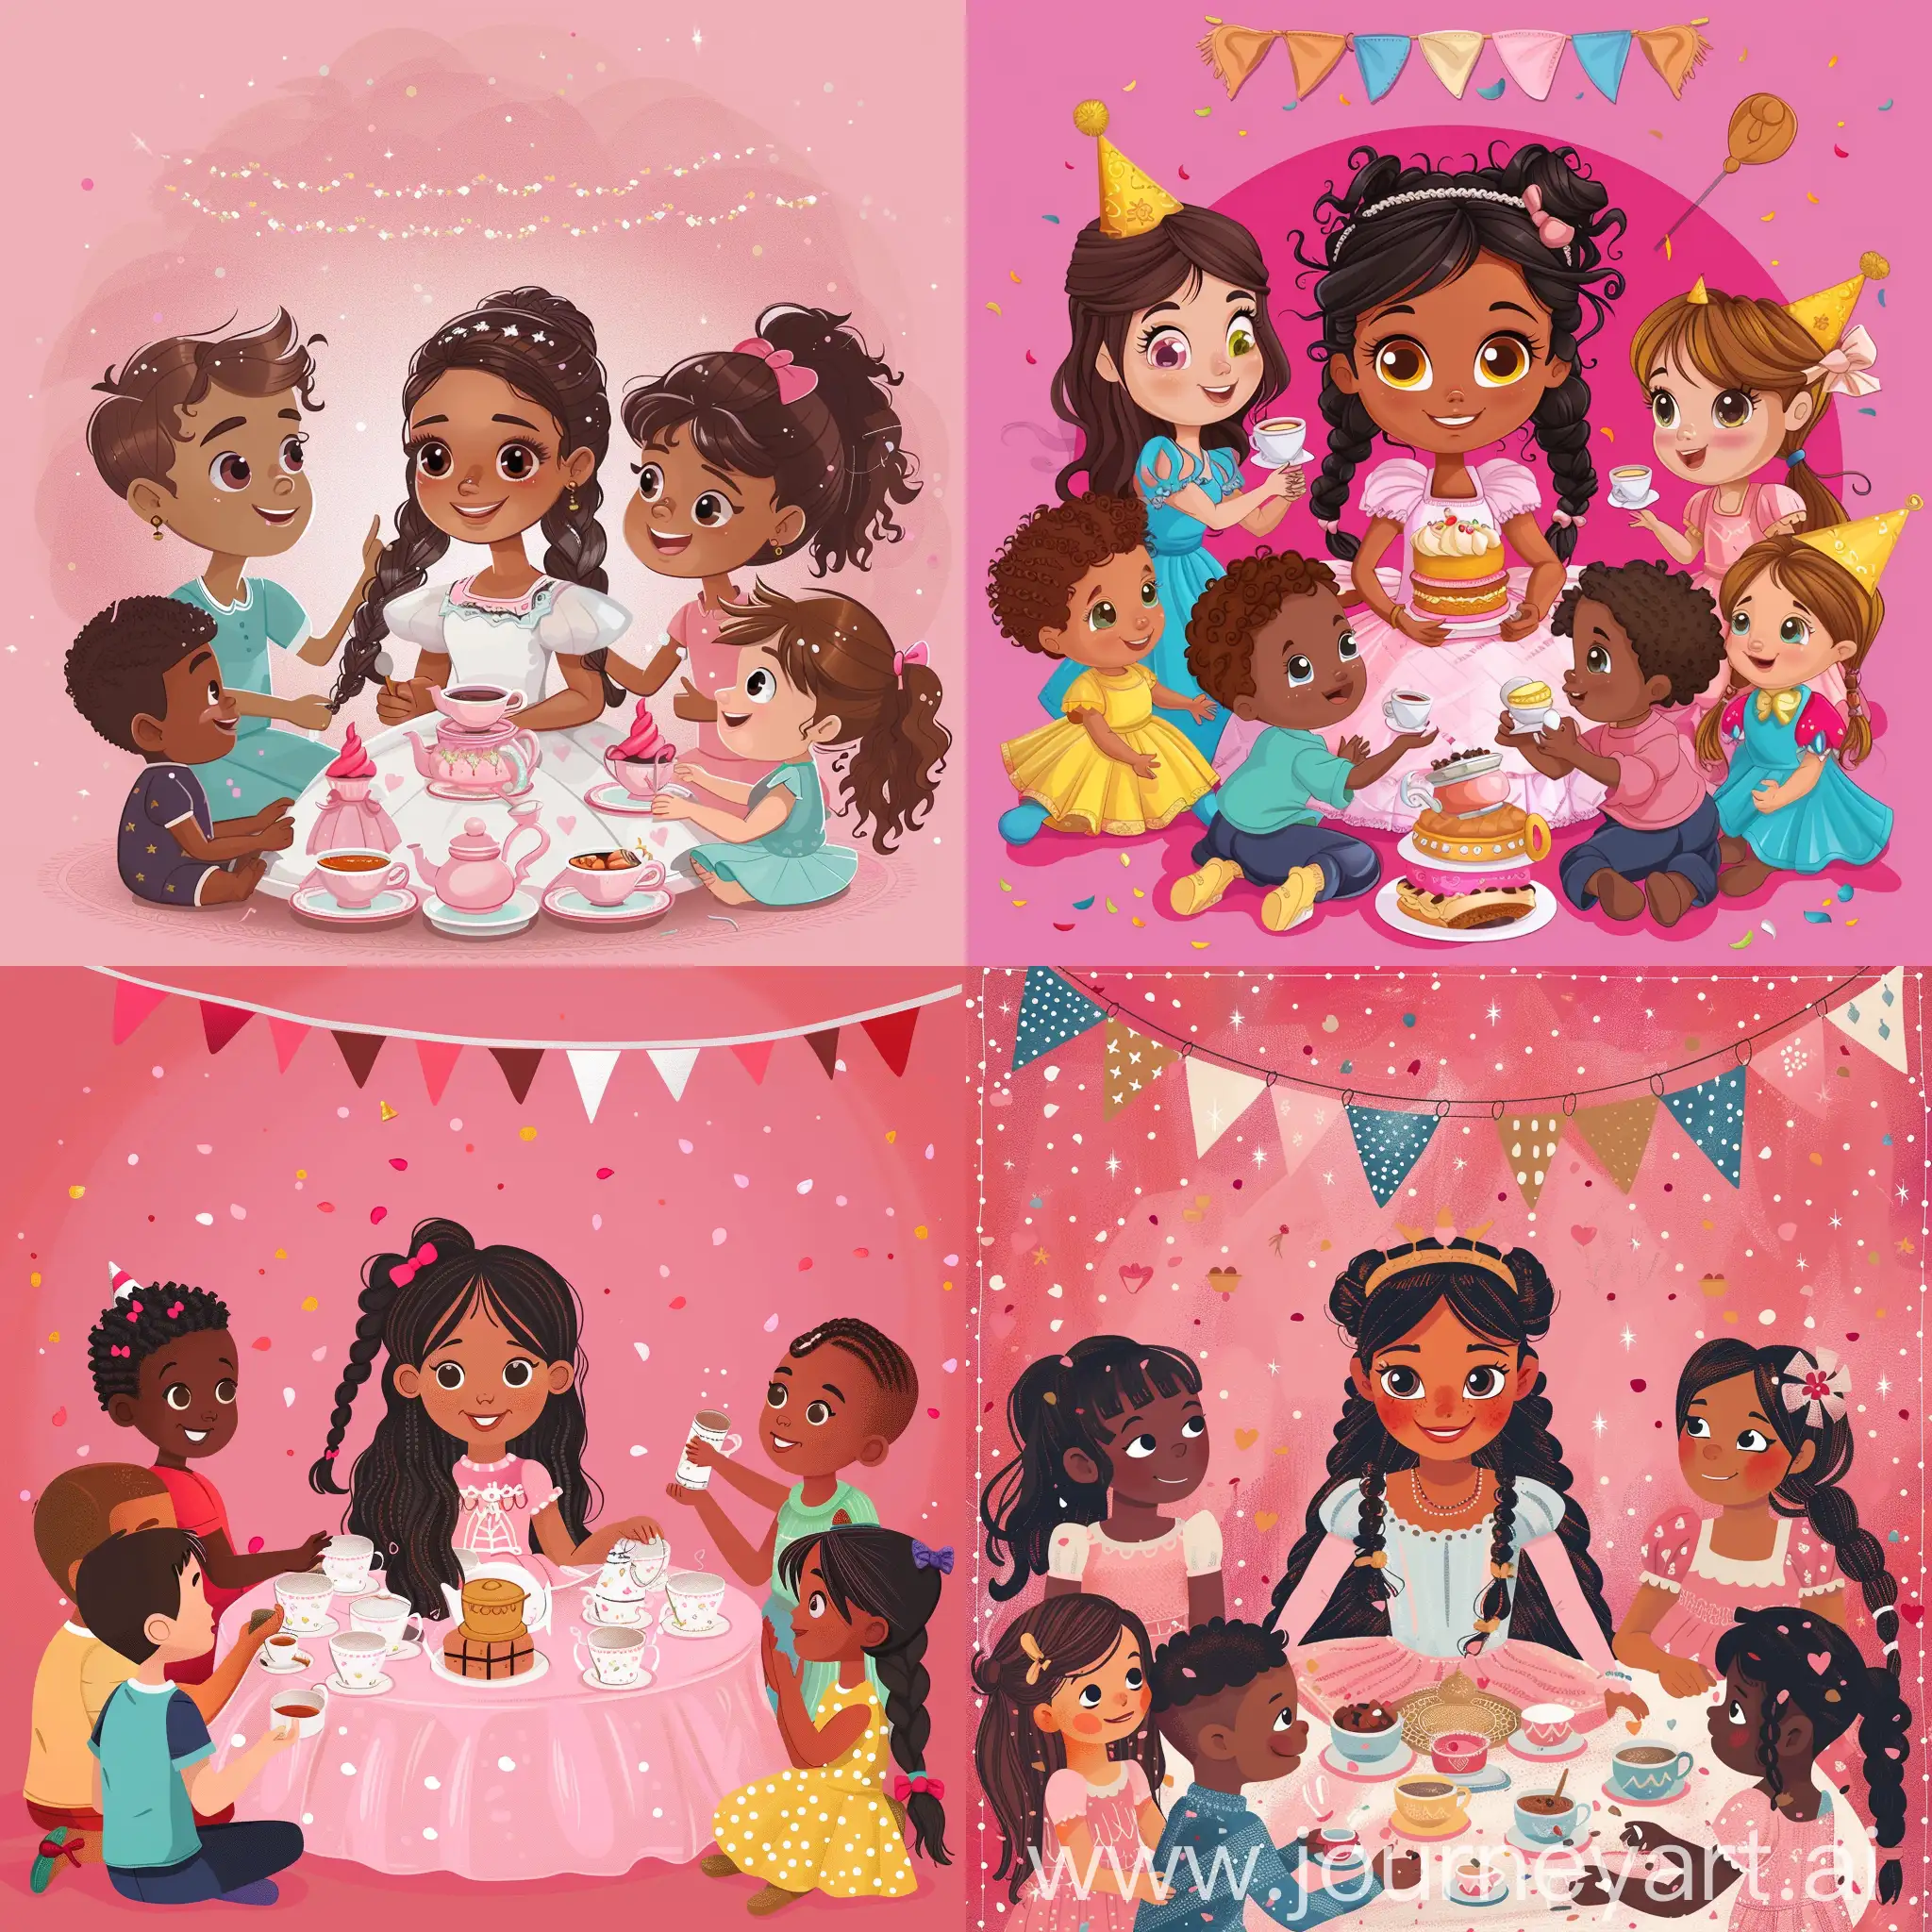 Colorful-Tea-Party-Birthday-Celebration-with-Cartoon-Princess-and-Friends